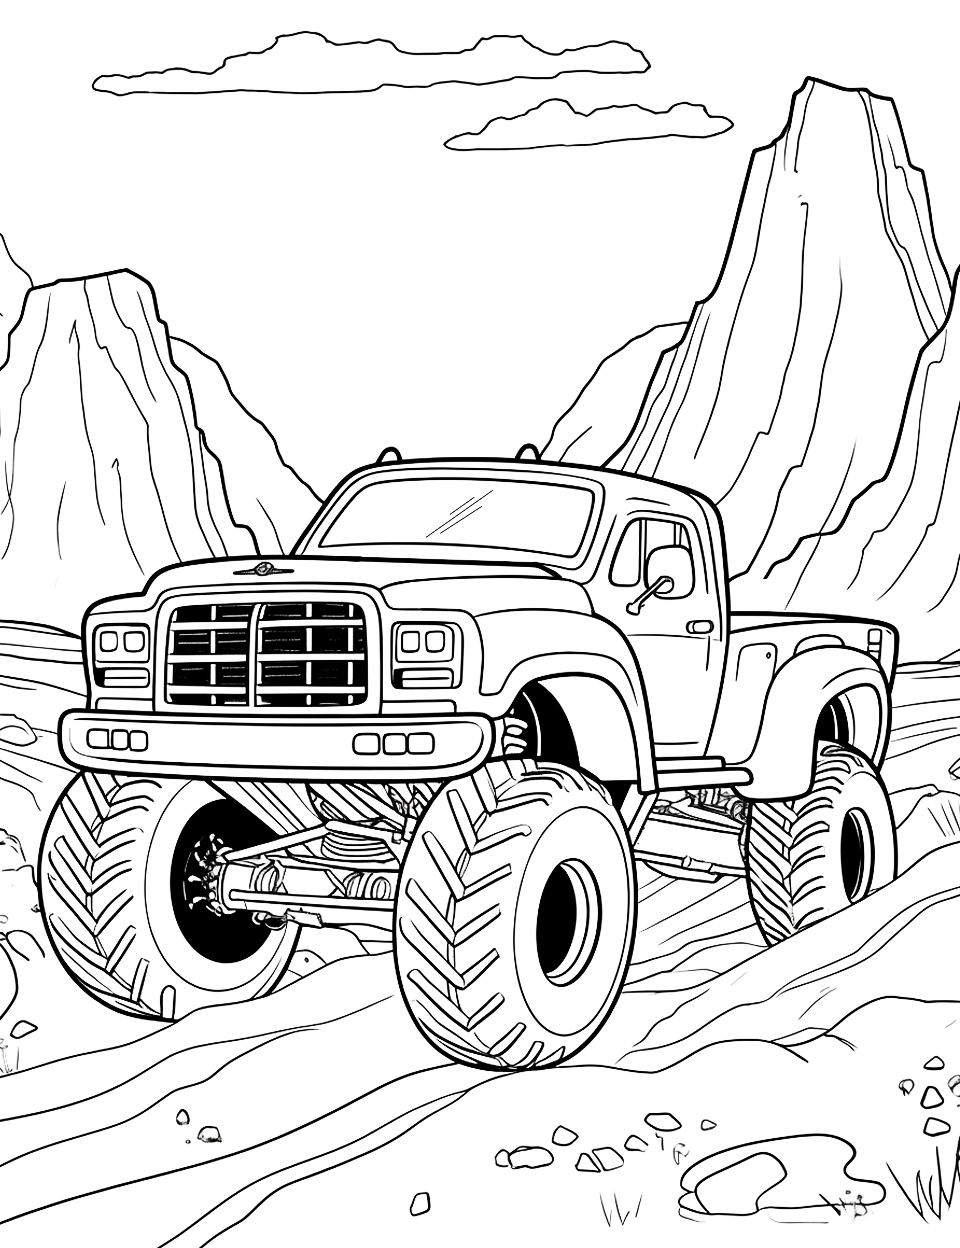 Old School Canyon Race Monster Truck Coloring Page - An old-school monster truck racing in a canyon.